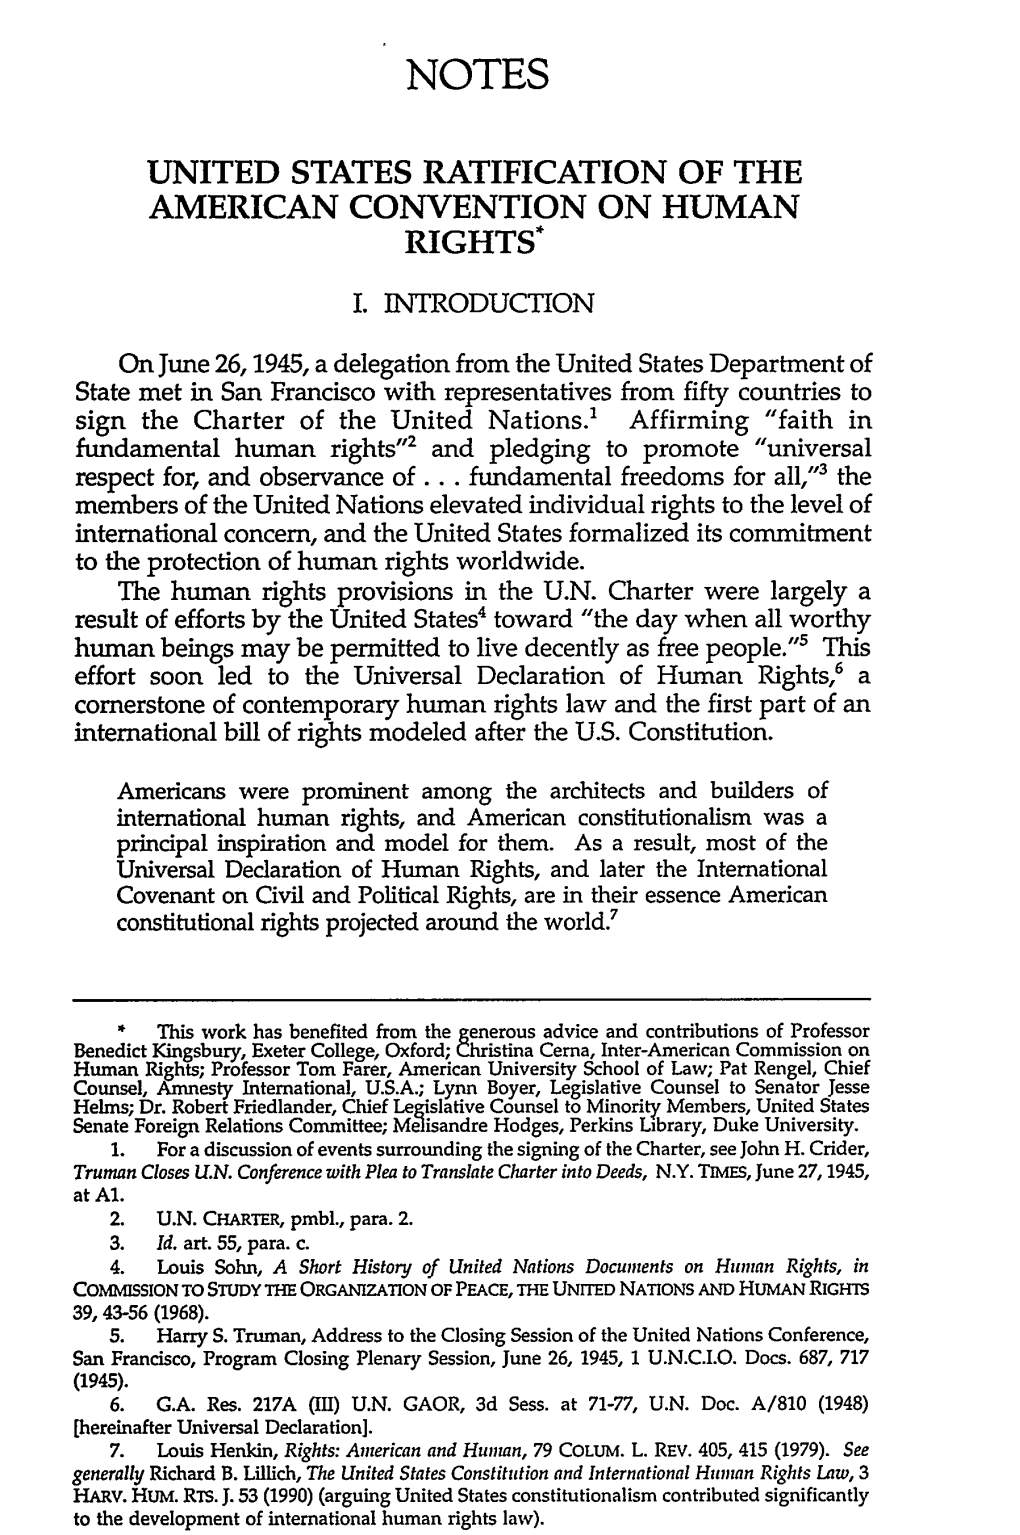 United States Ratification of the American Convention on Human Rights*